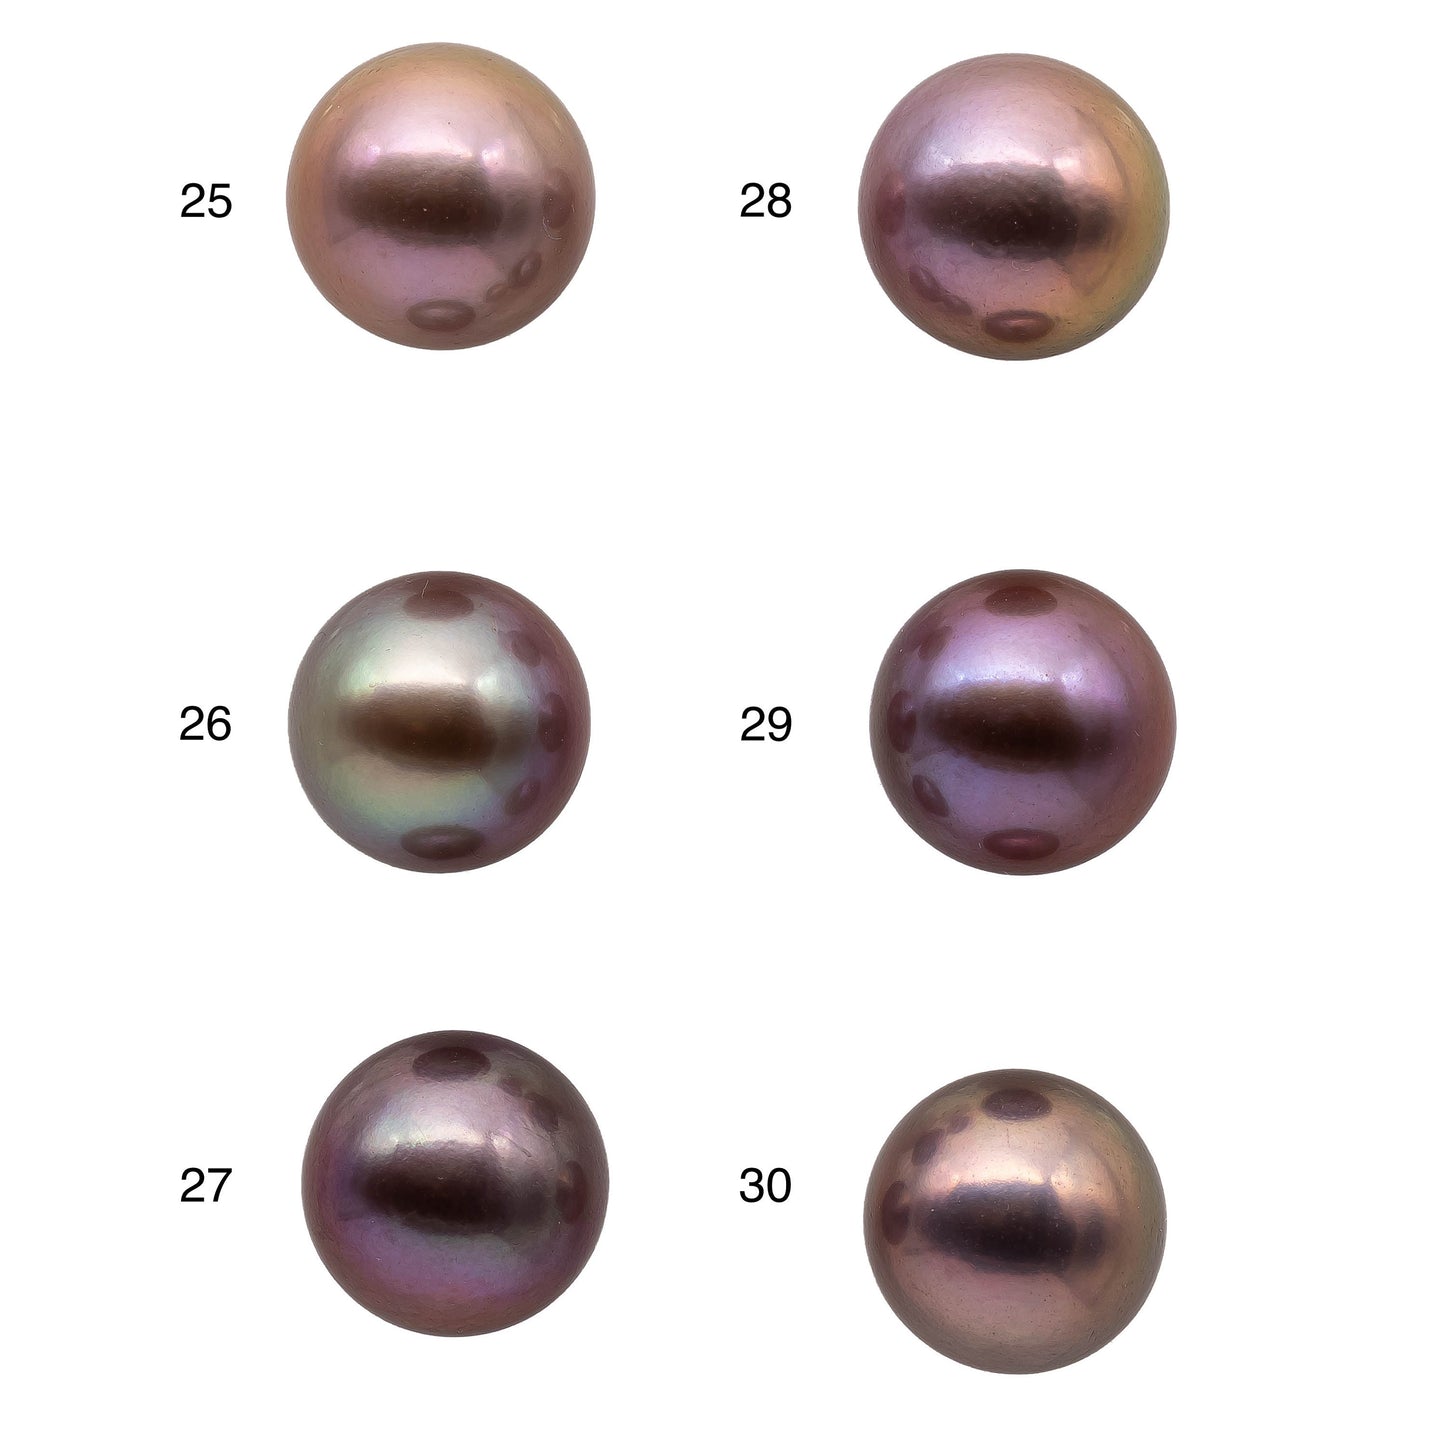 AAA Loose Edison Pearl Round High Luster Undrilled Single Piece Freshwater Pearl Natural Color with Blemish in the Back 13-14mm, SKU# 1152EP